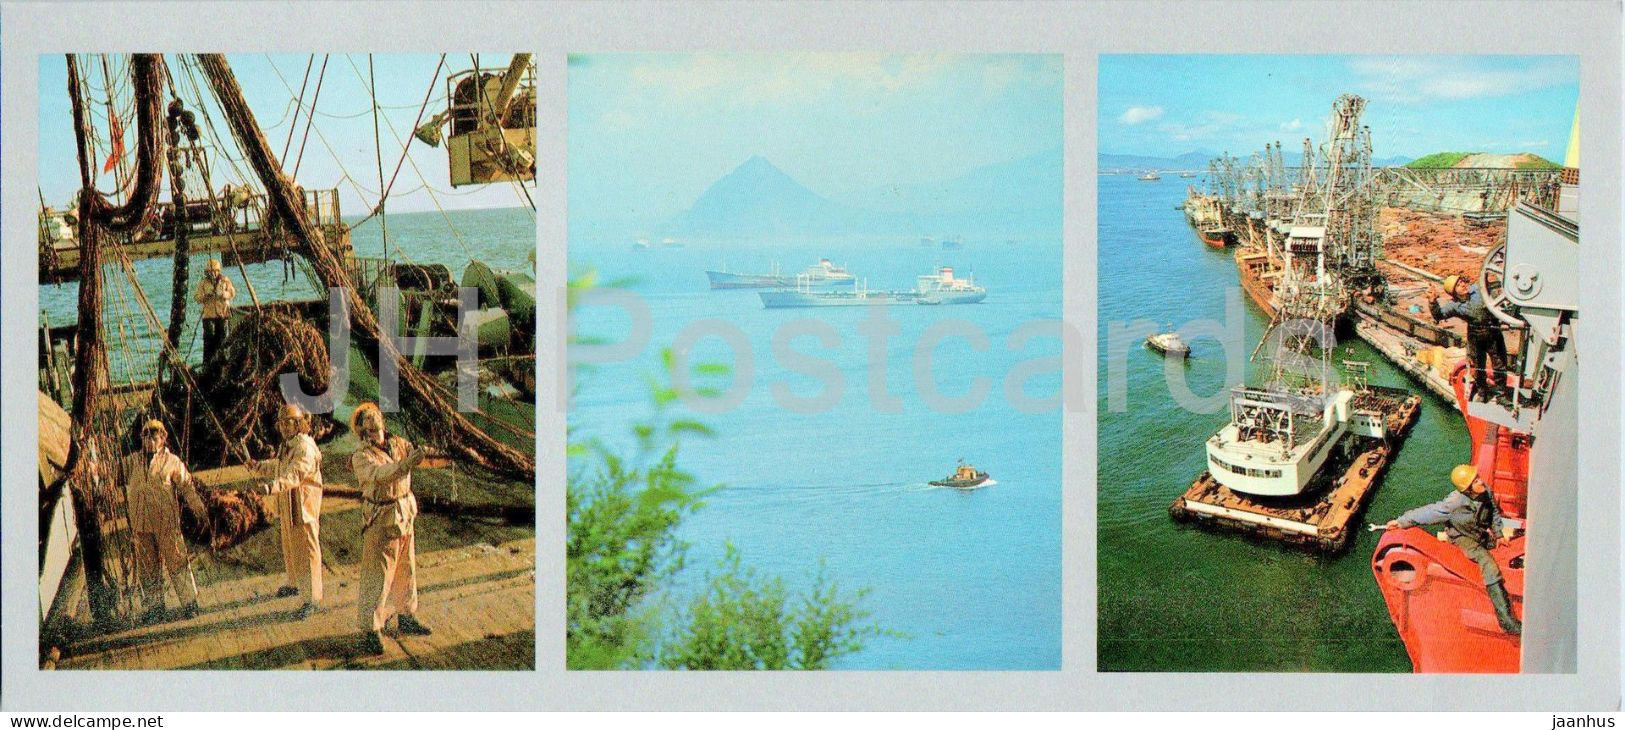 Bay Of The Peter The Great - Nakhodka - Port - Ship - 1980 - Russia USSR - Unused - Russie